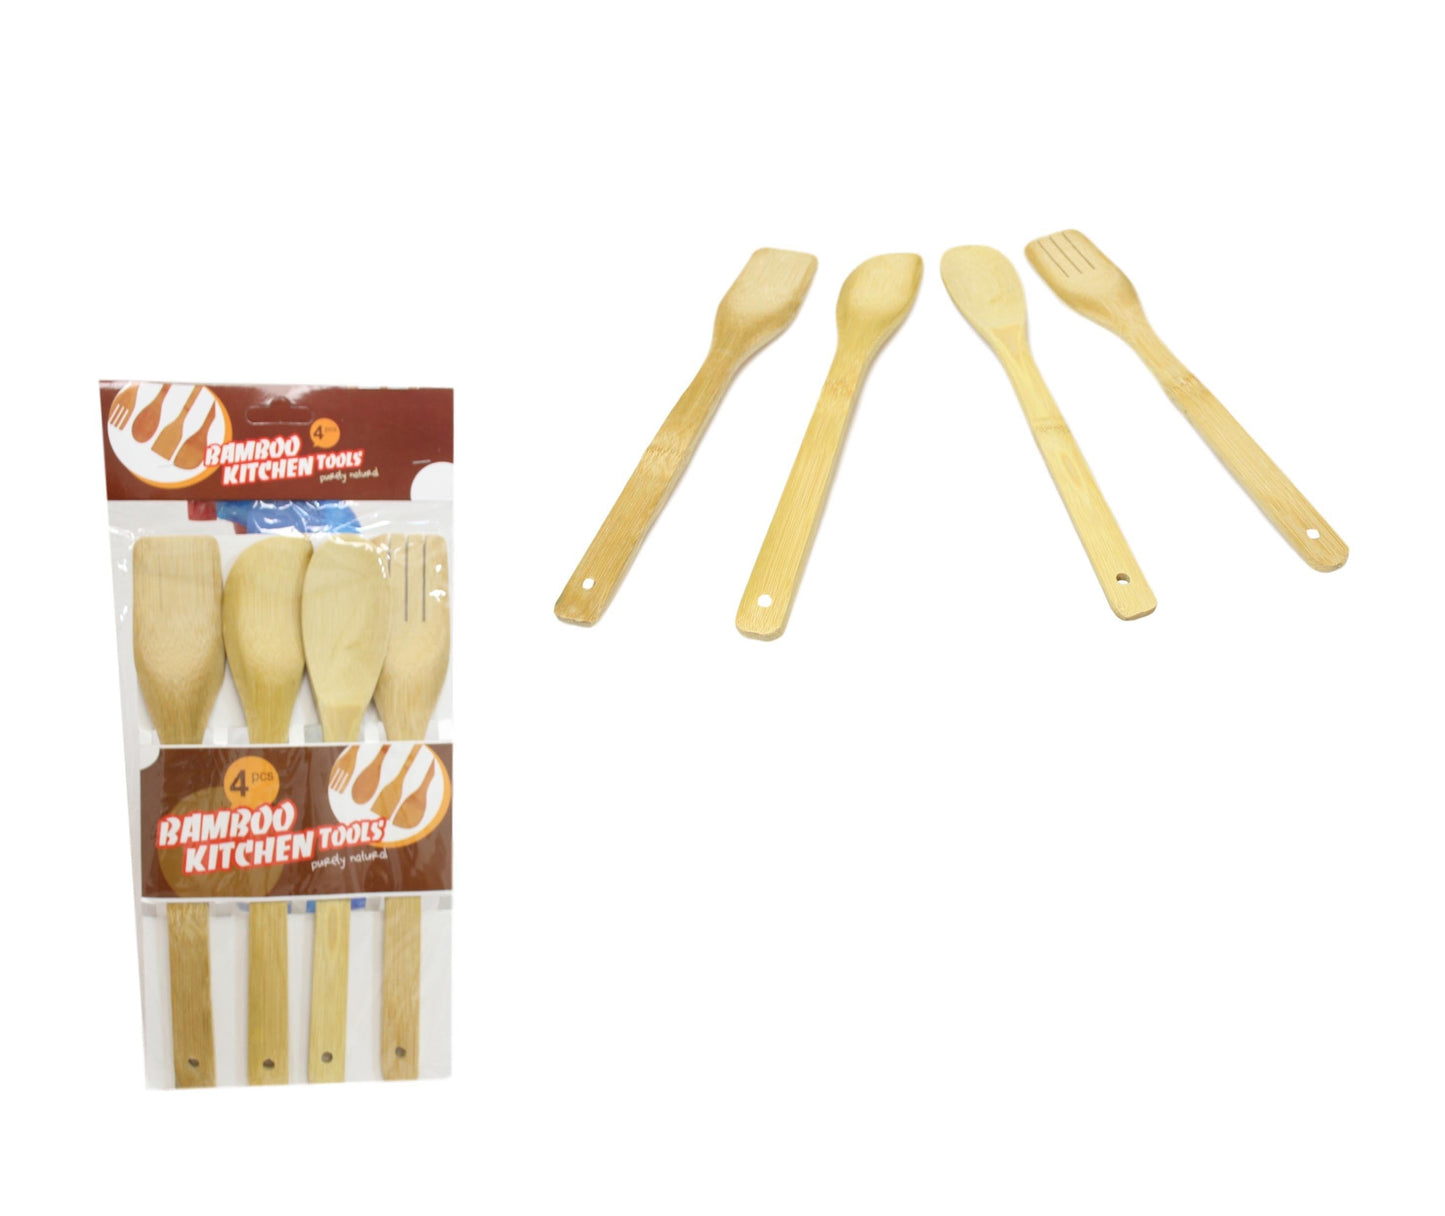 Wooden Baking Cooking Spoon Set Bamboo Kitchen Tools 4 Pack 29cm 5855 (Large Letter Rate)